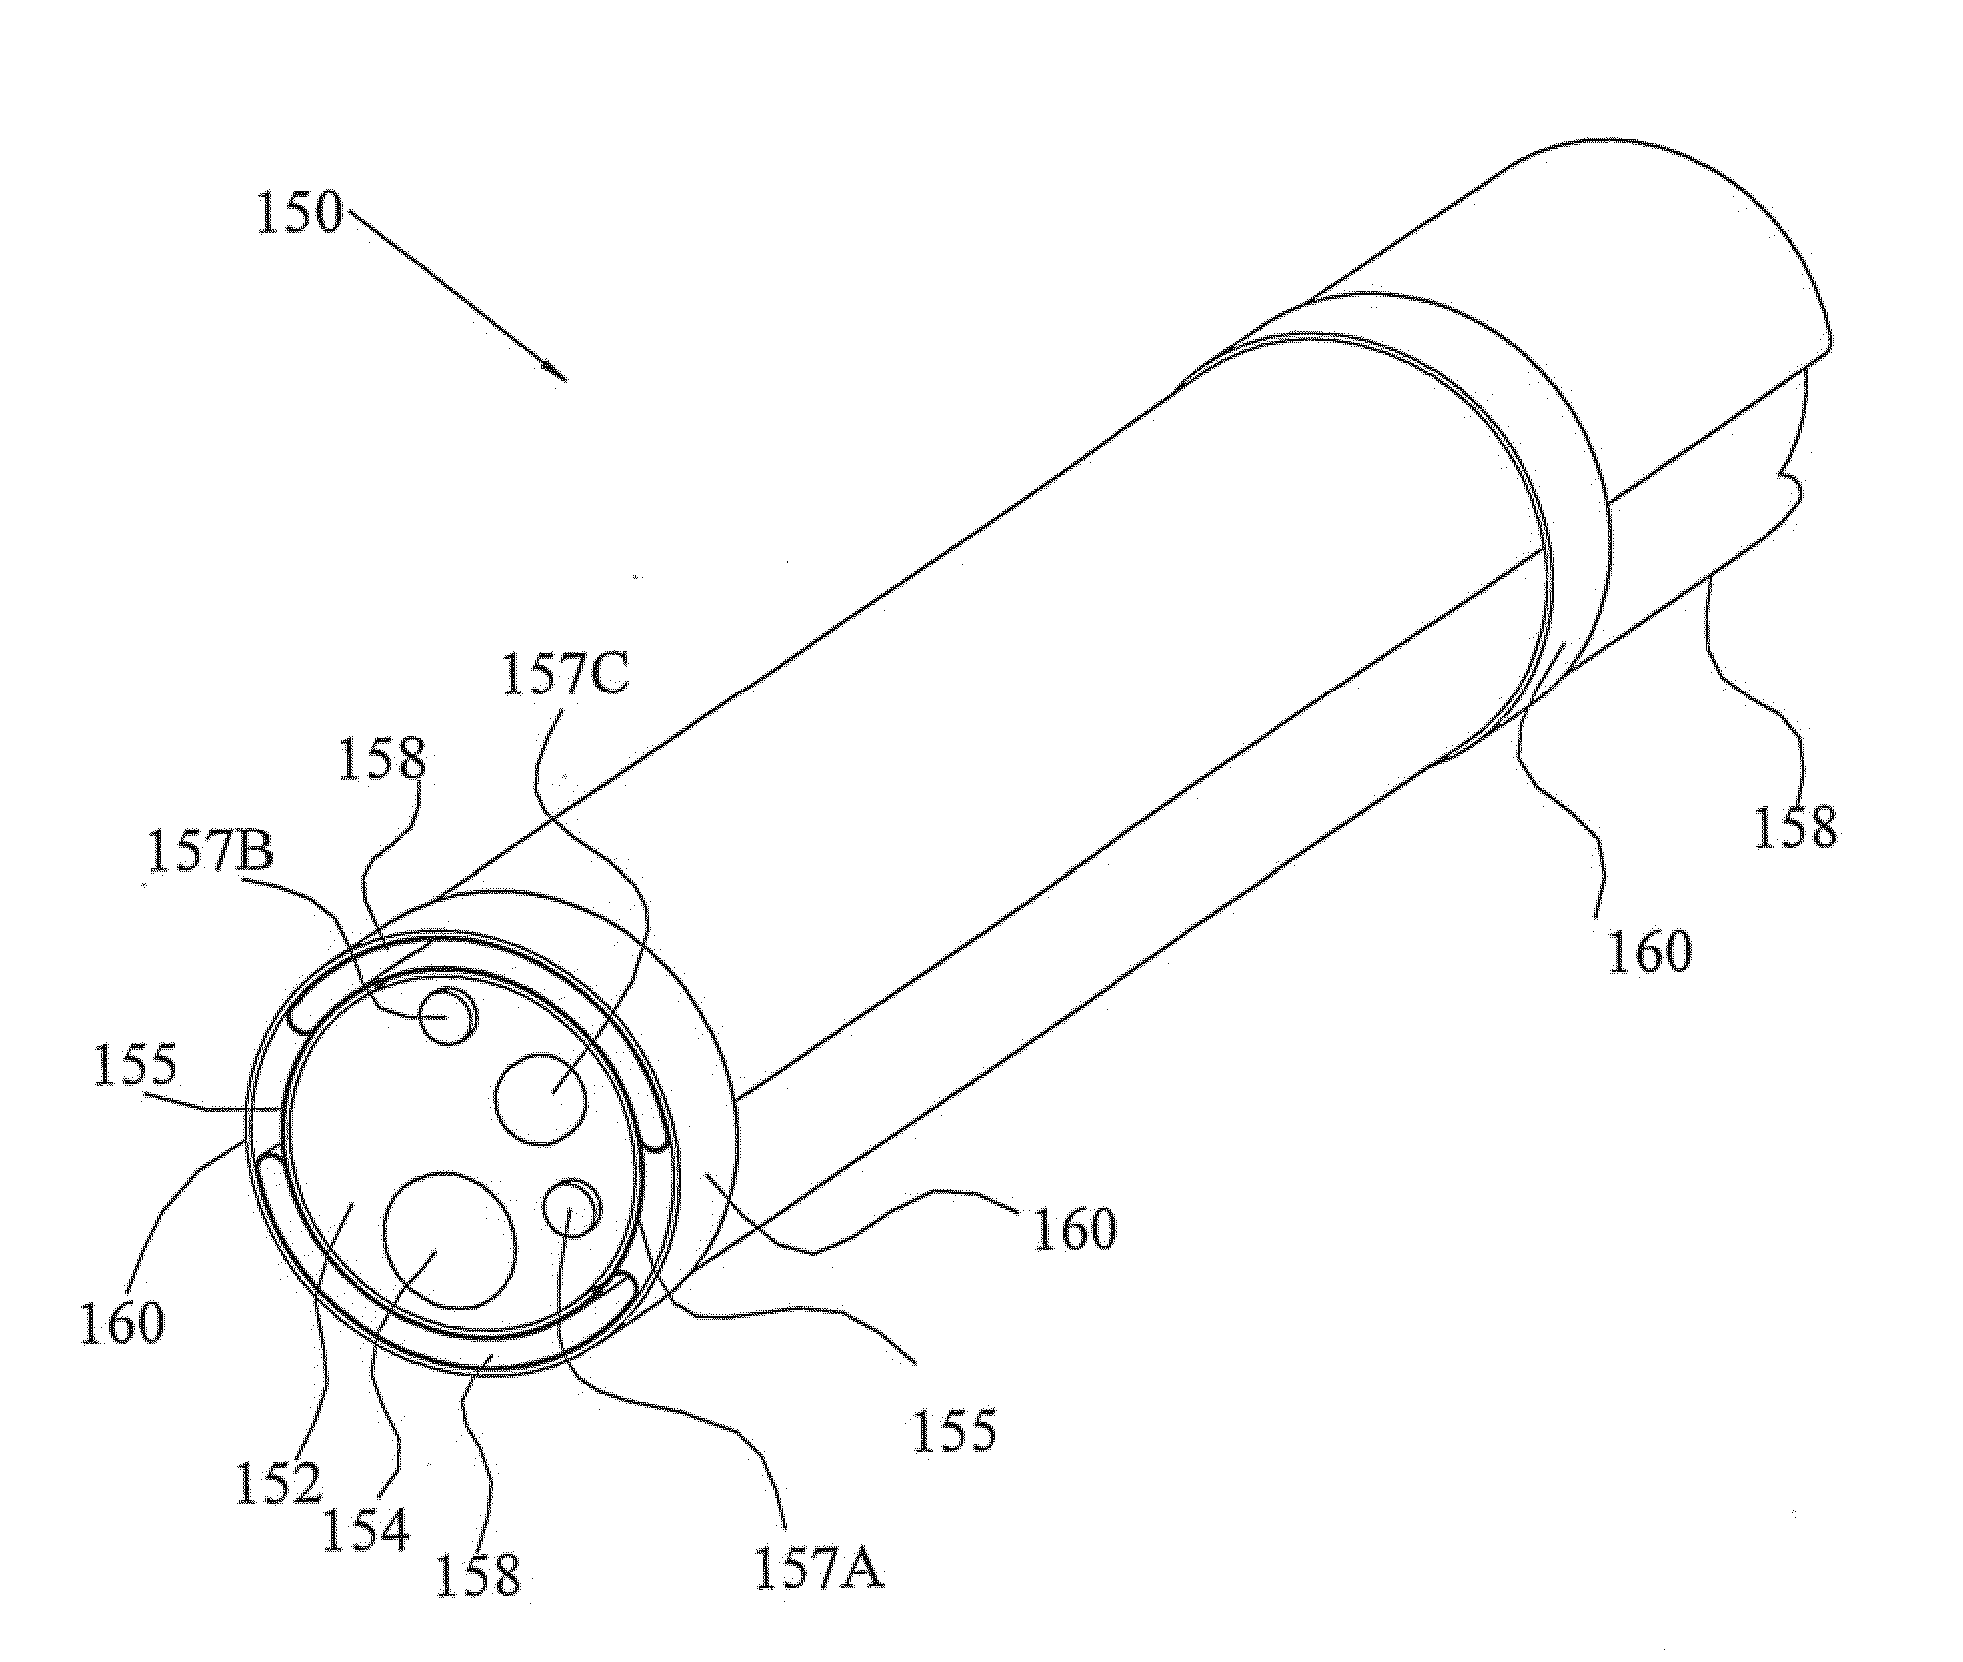 Tapered lumens for multi-lumen sleeves used in endoscopic procedures